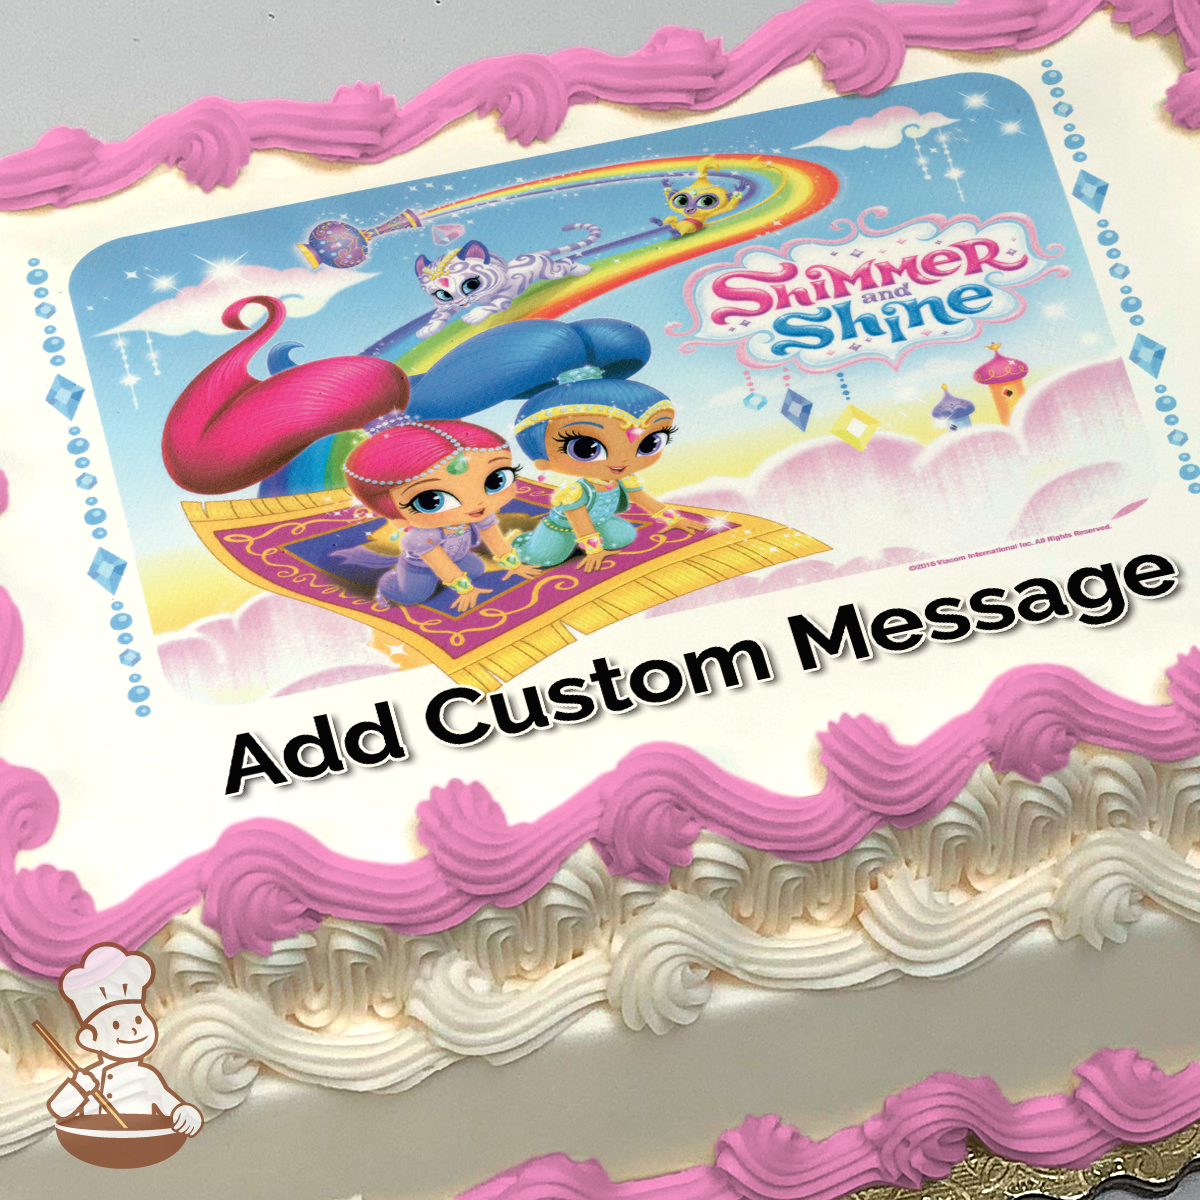 Number 4 shimmer and shine cake | Stacey's Cake Creations | Flickr